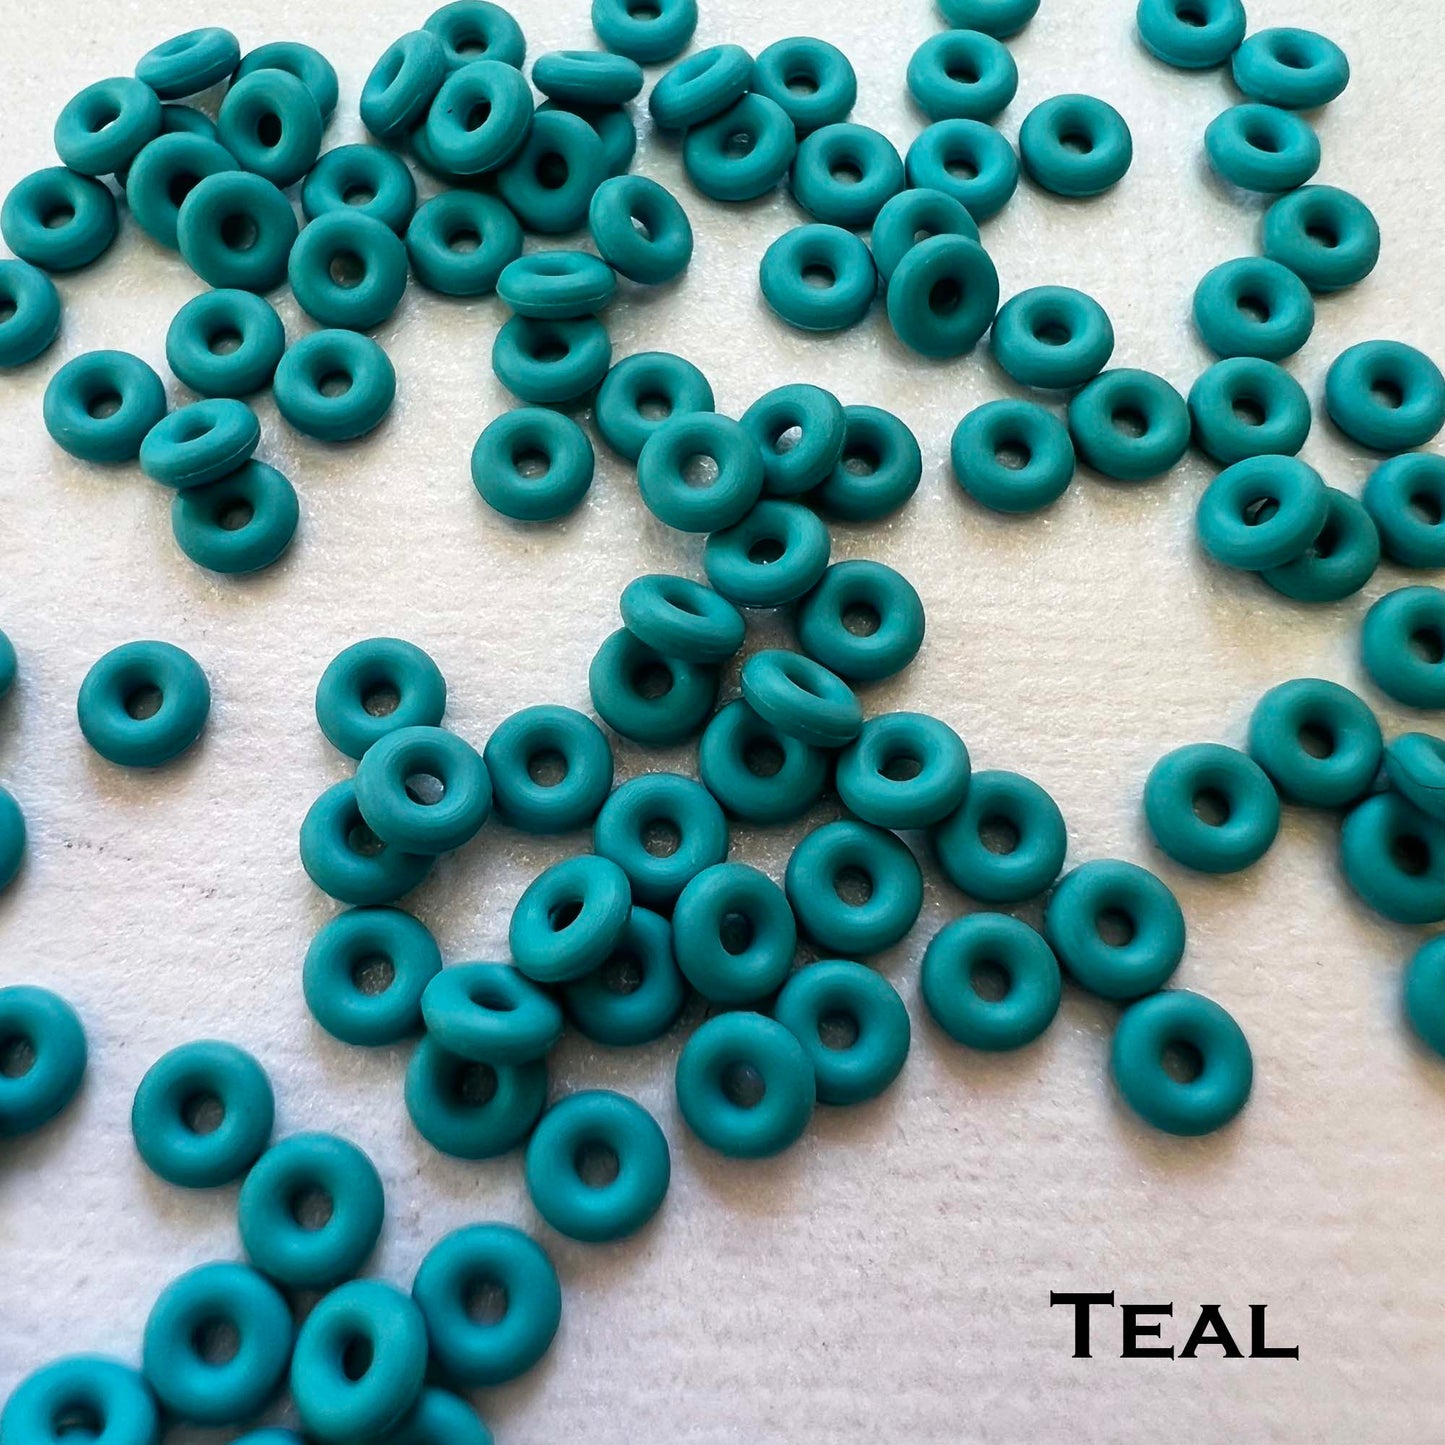 3mm Rubber O-Rings (ID: 1.1mm) - choose color - Package of 1000